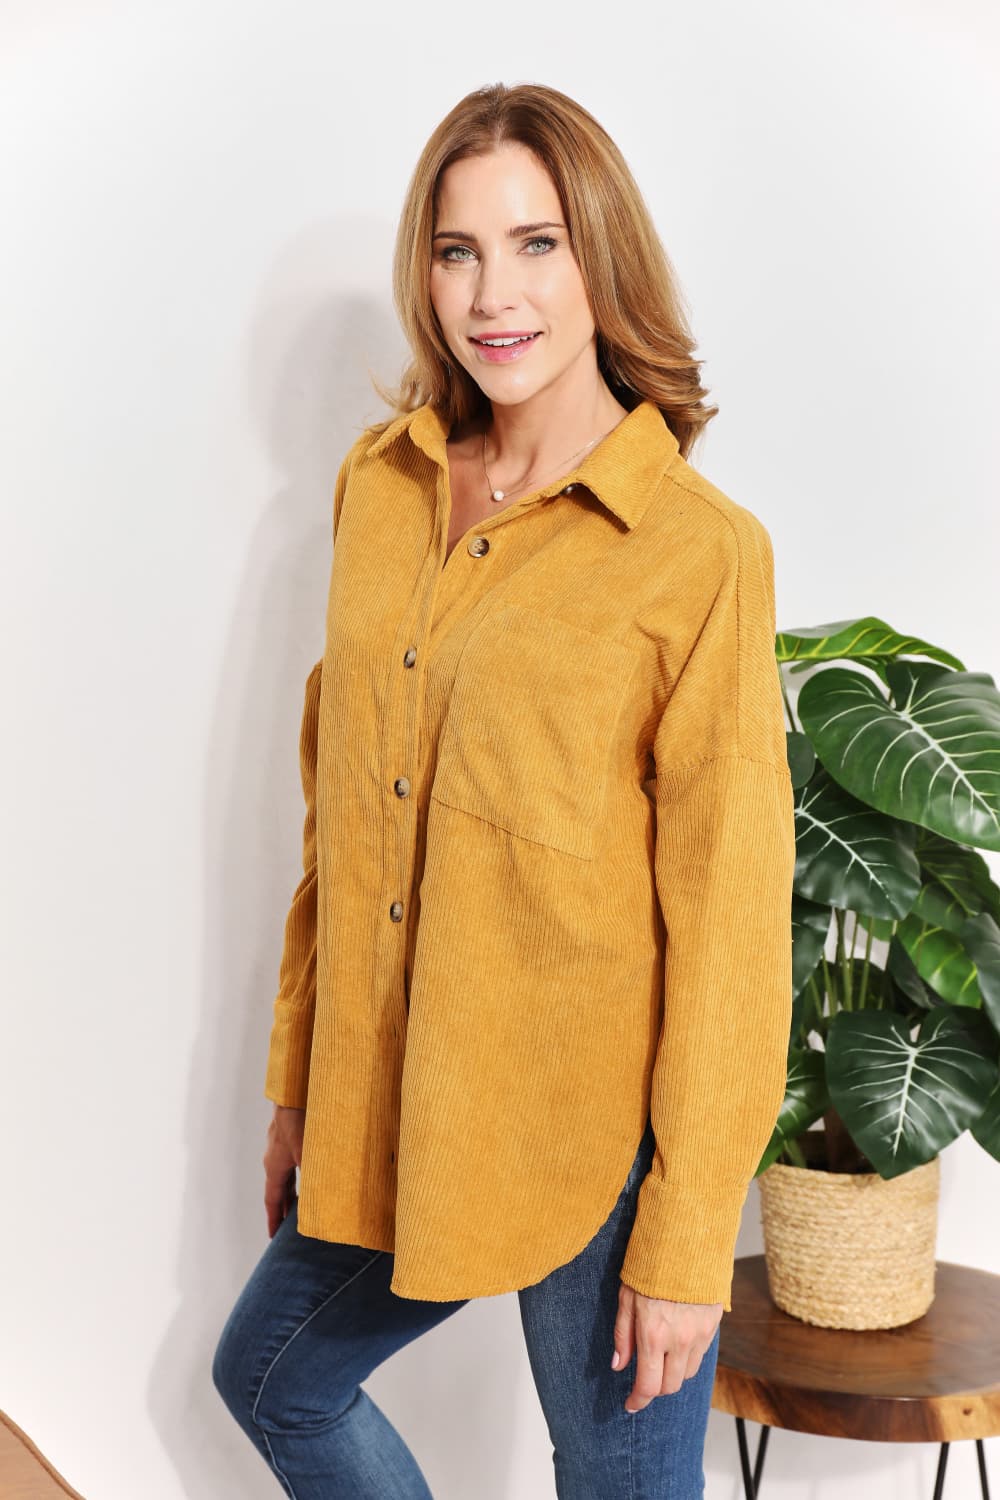 HEYSON Full Size Oversized Corduroy  Button-Down Tunic Shirt with Bust Pocket BLUE ZONE PLANET